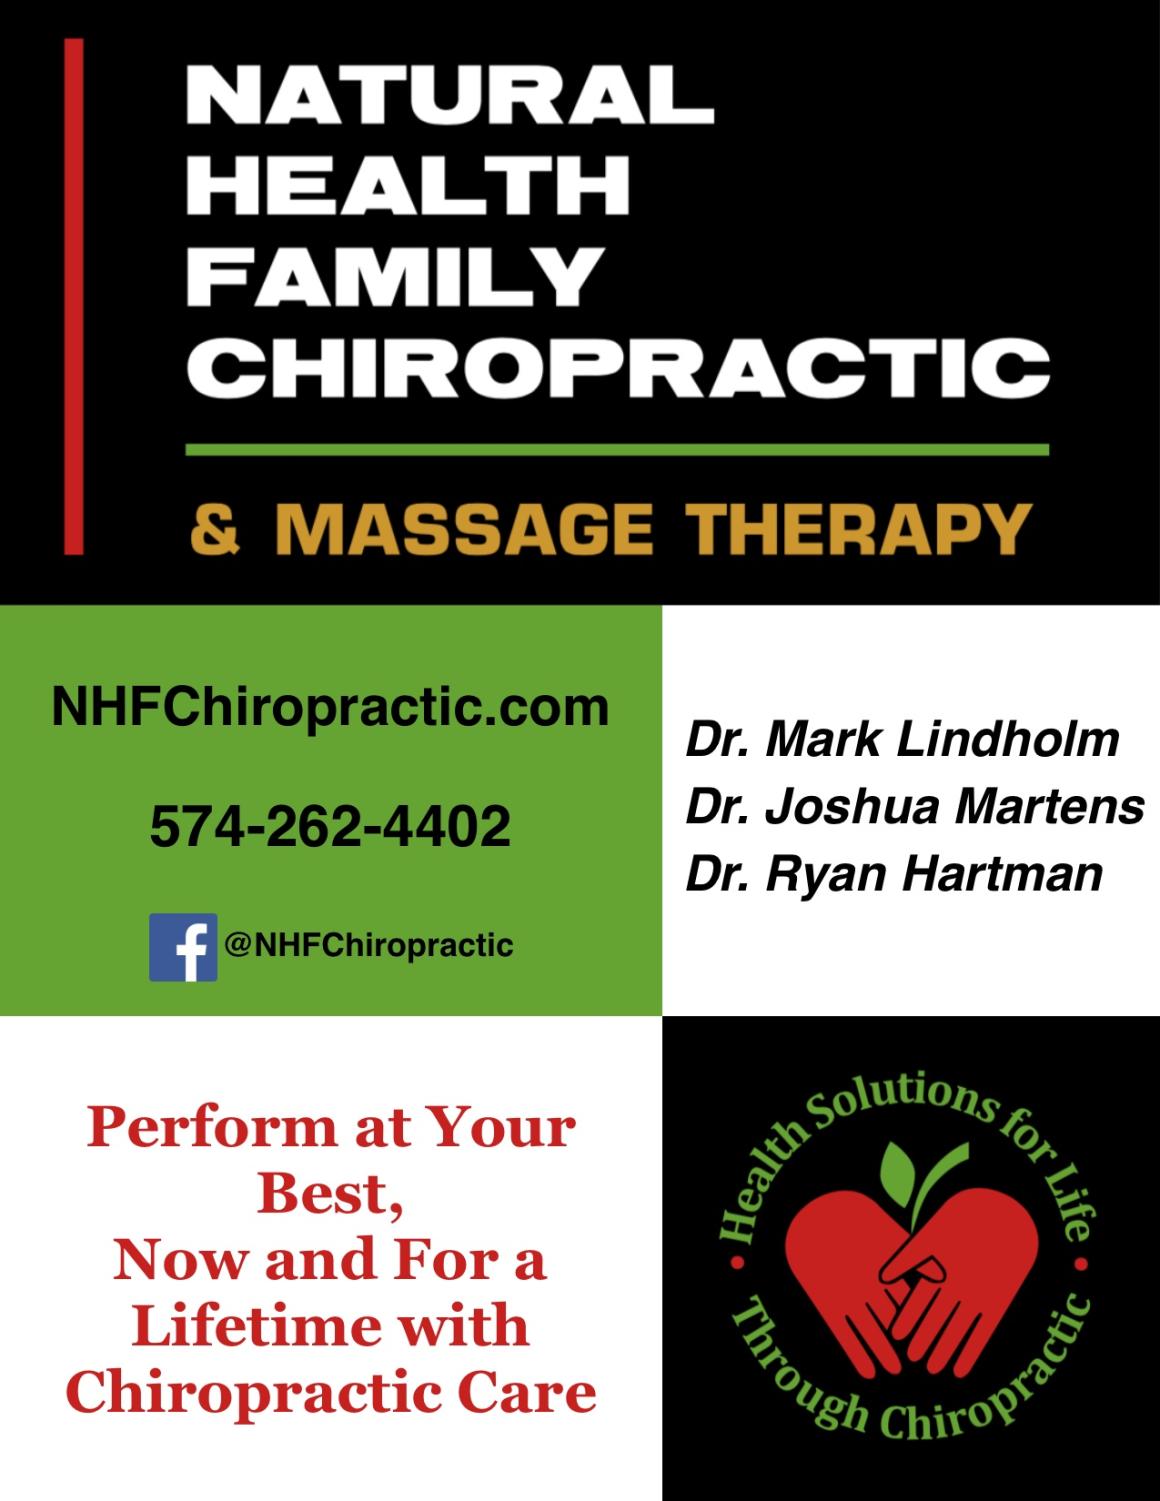 Natural Health Family Chiropractic